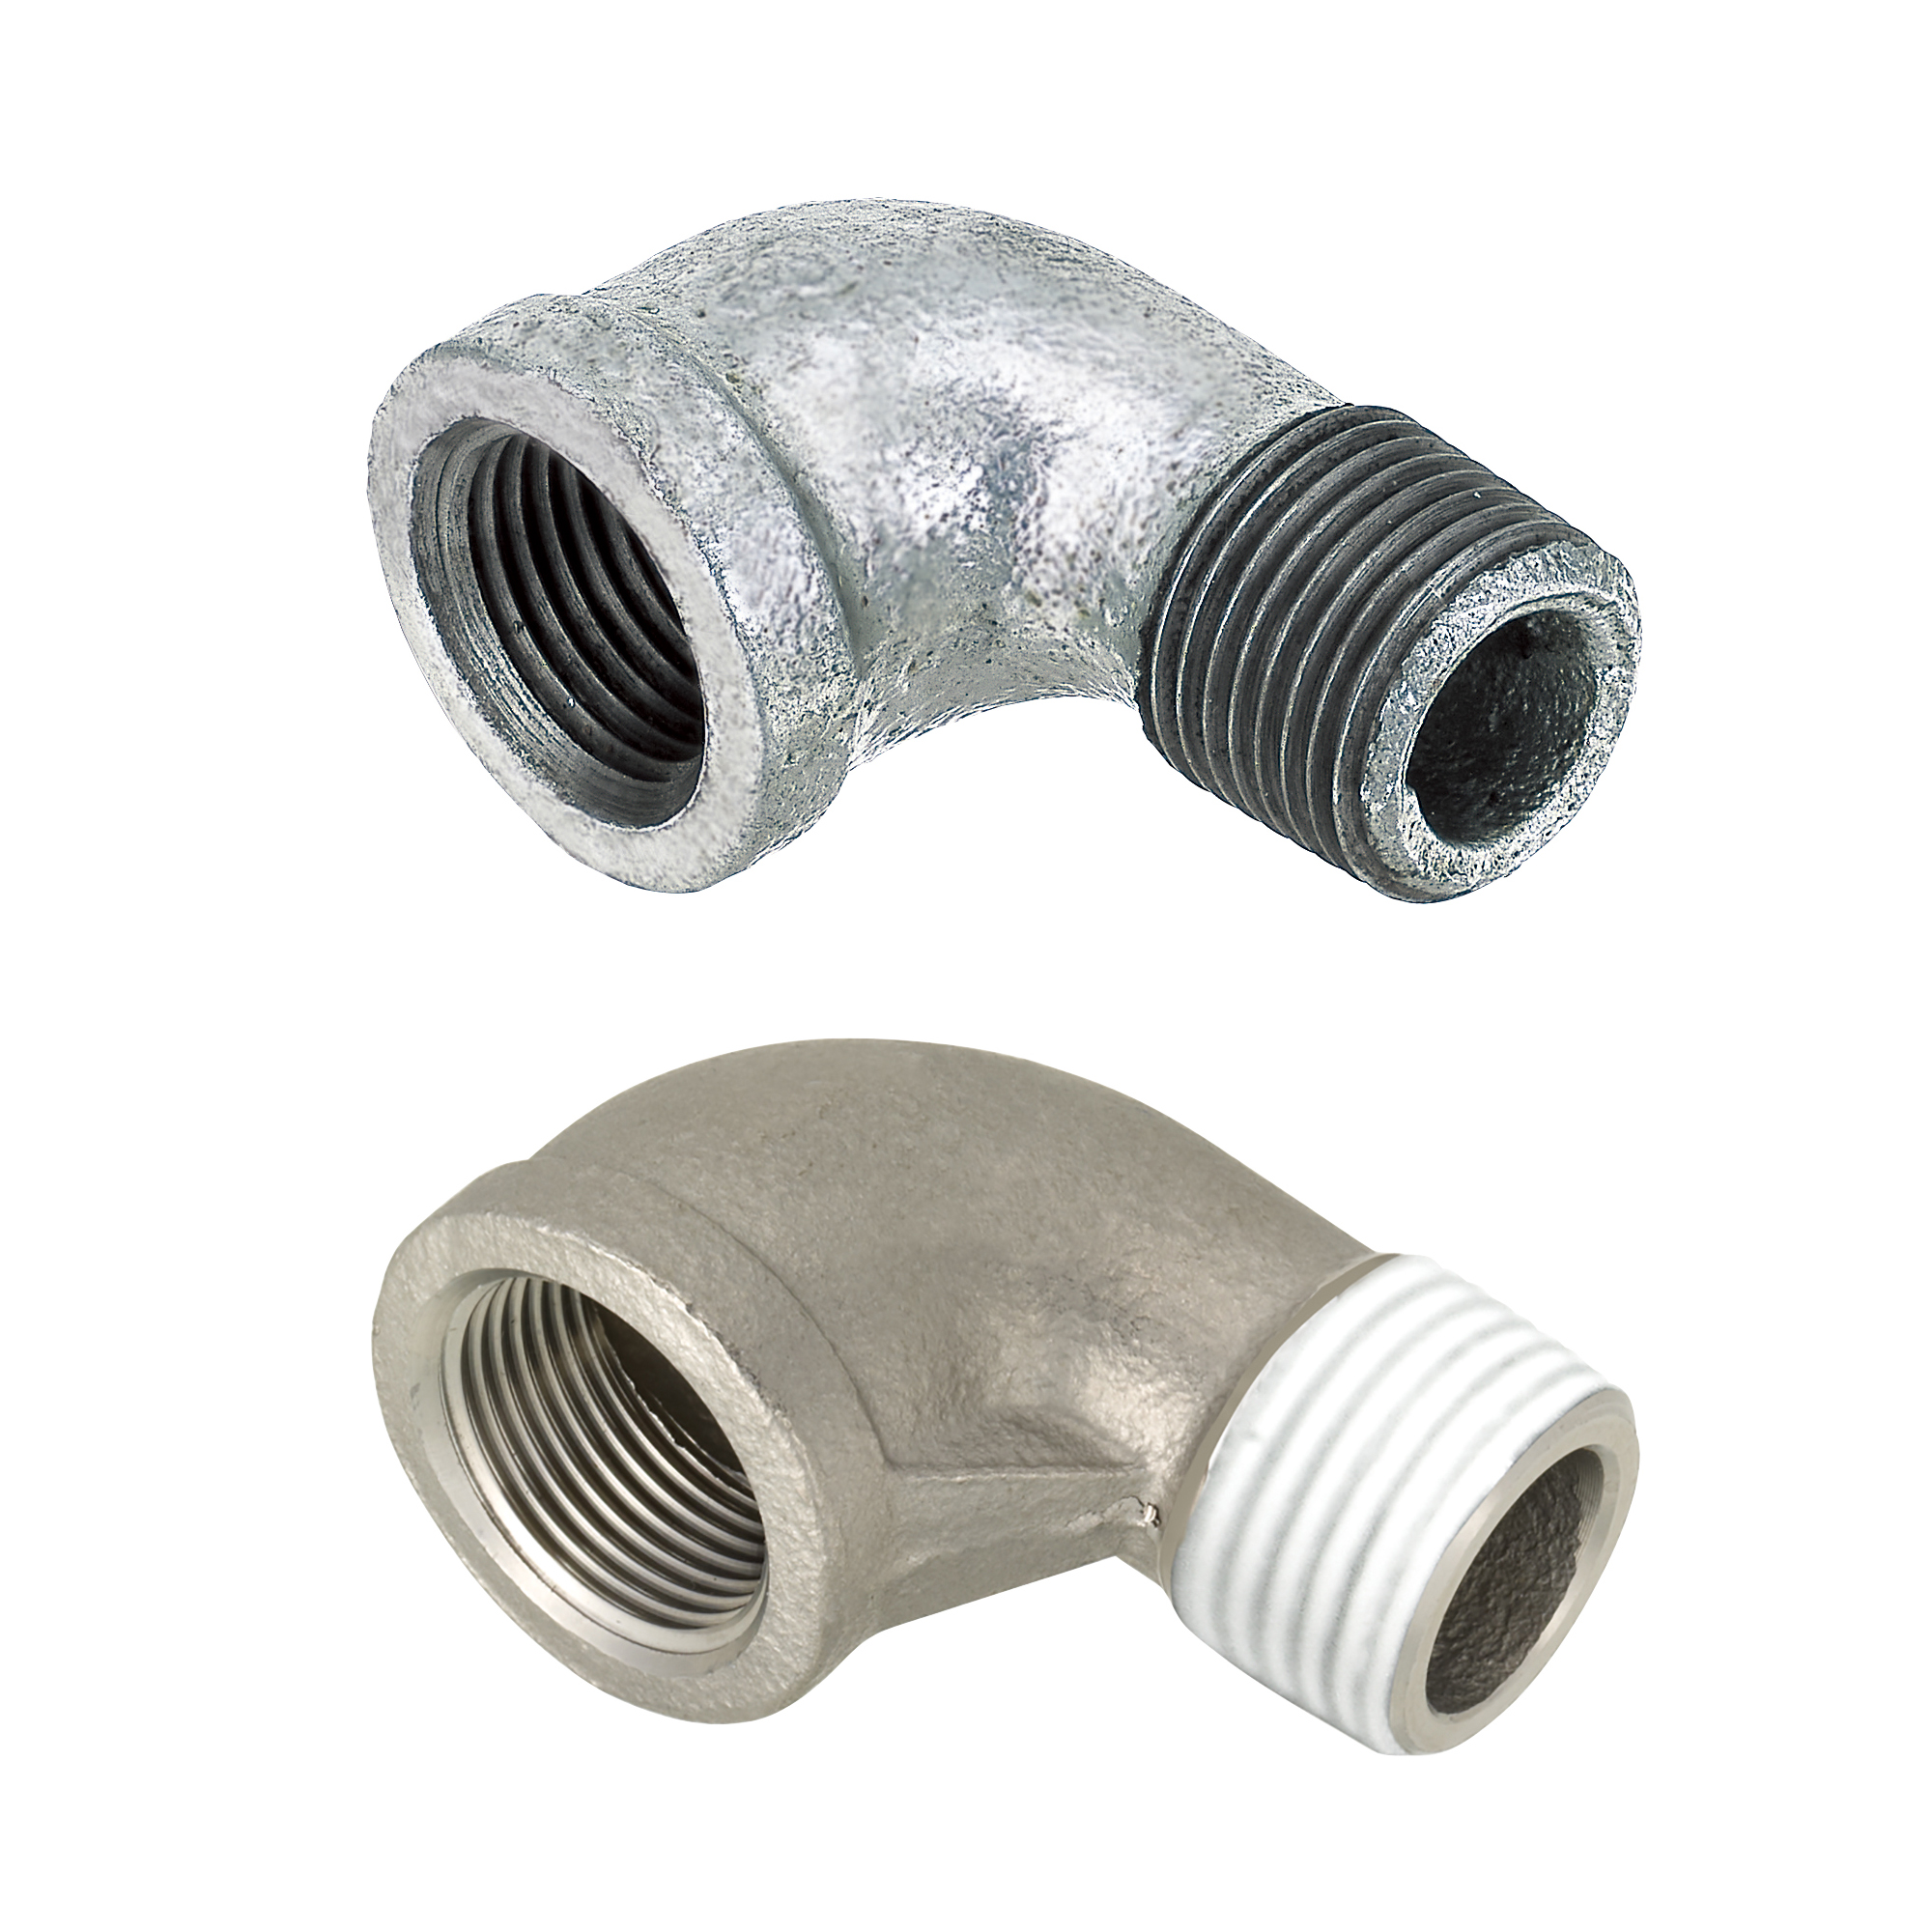 Low Pressure Fittings/90 Deg. Elbow/Threaded and Tapped SGPPEL15A